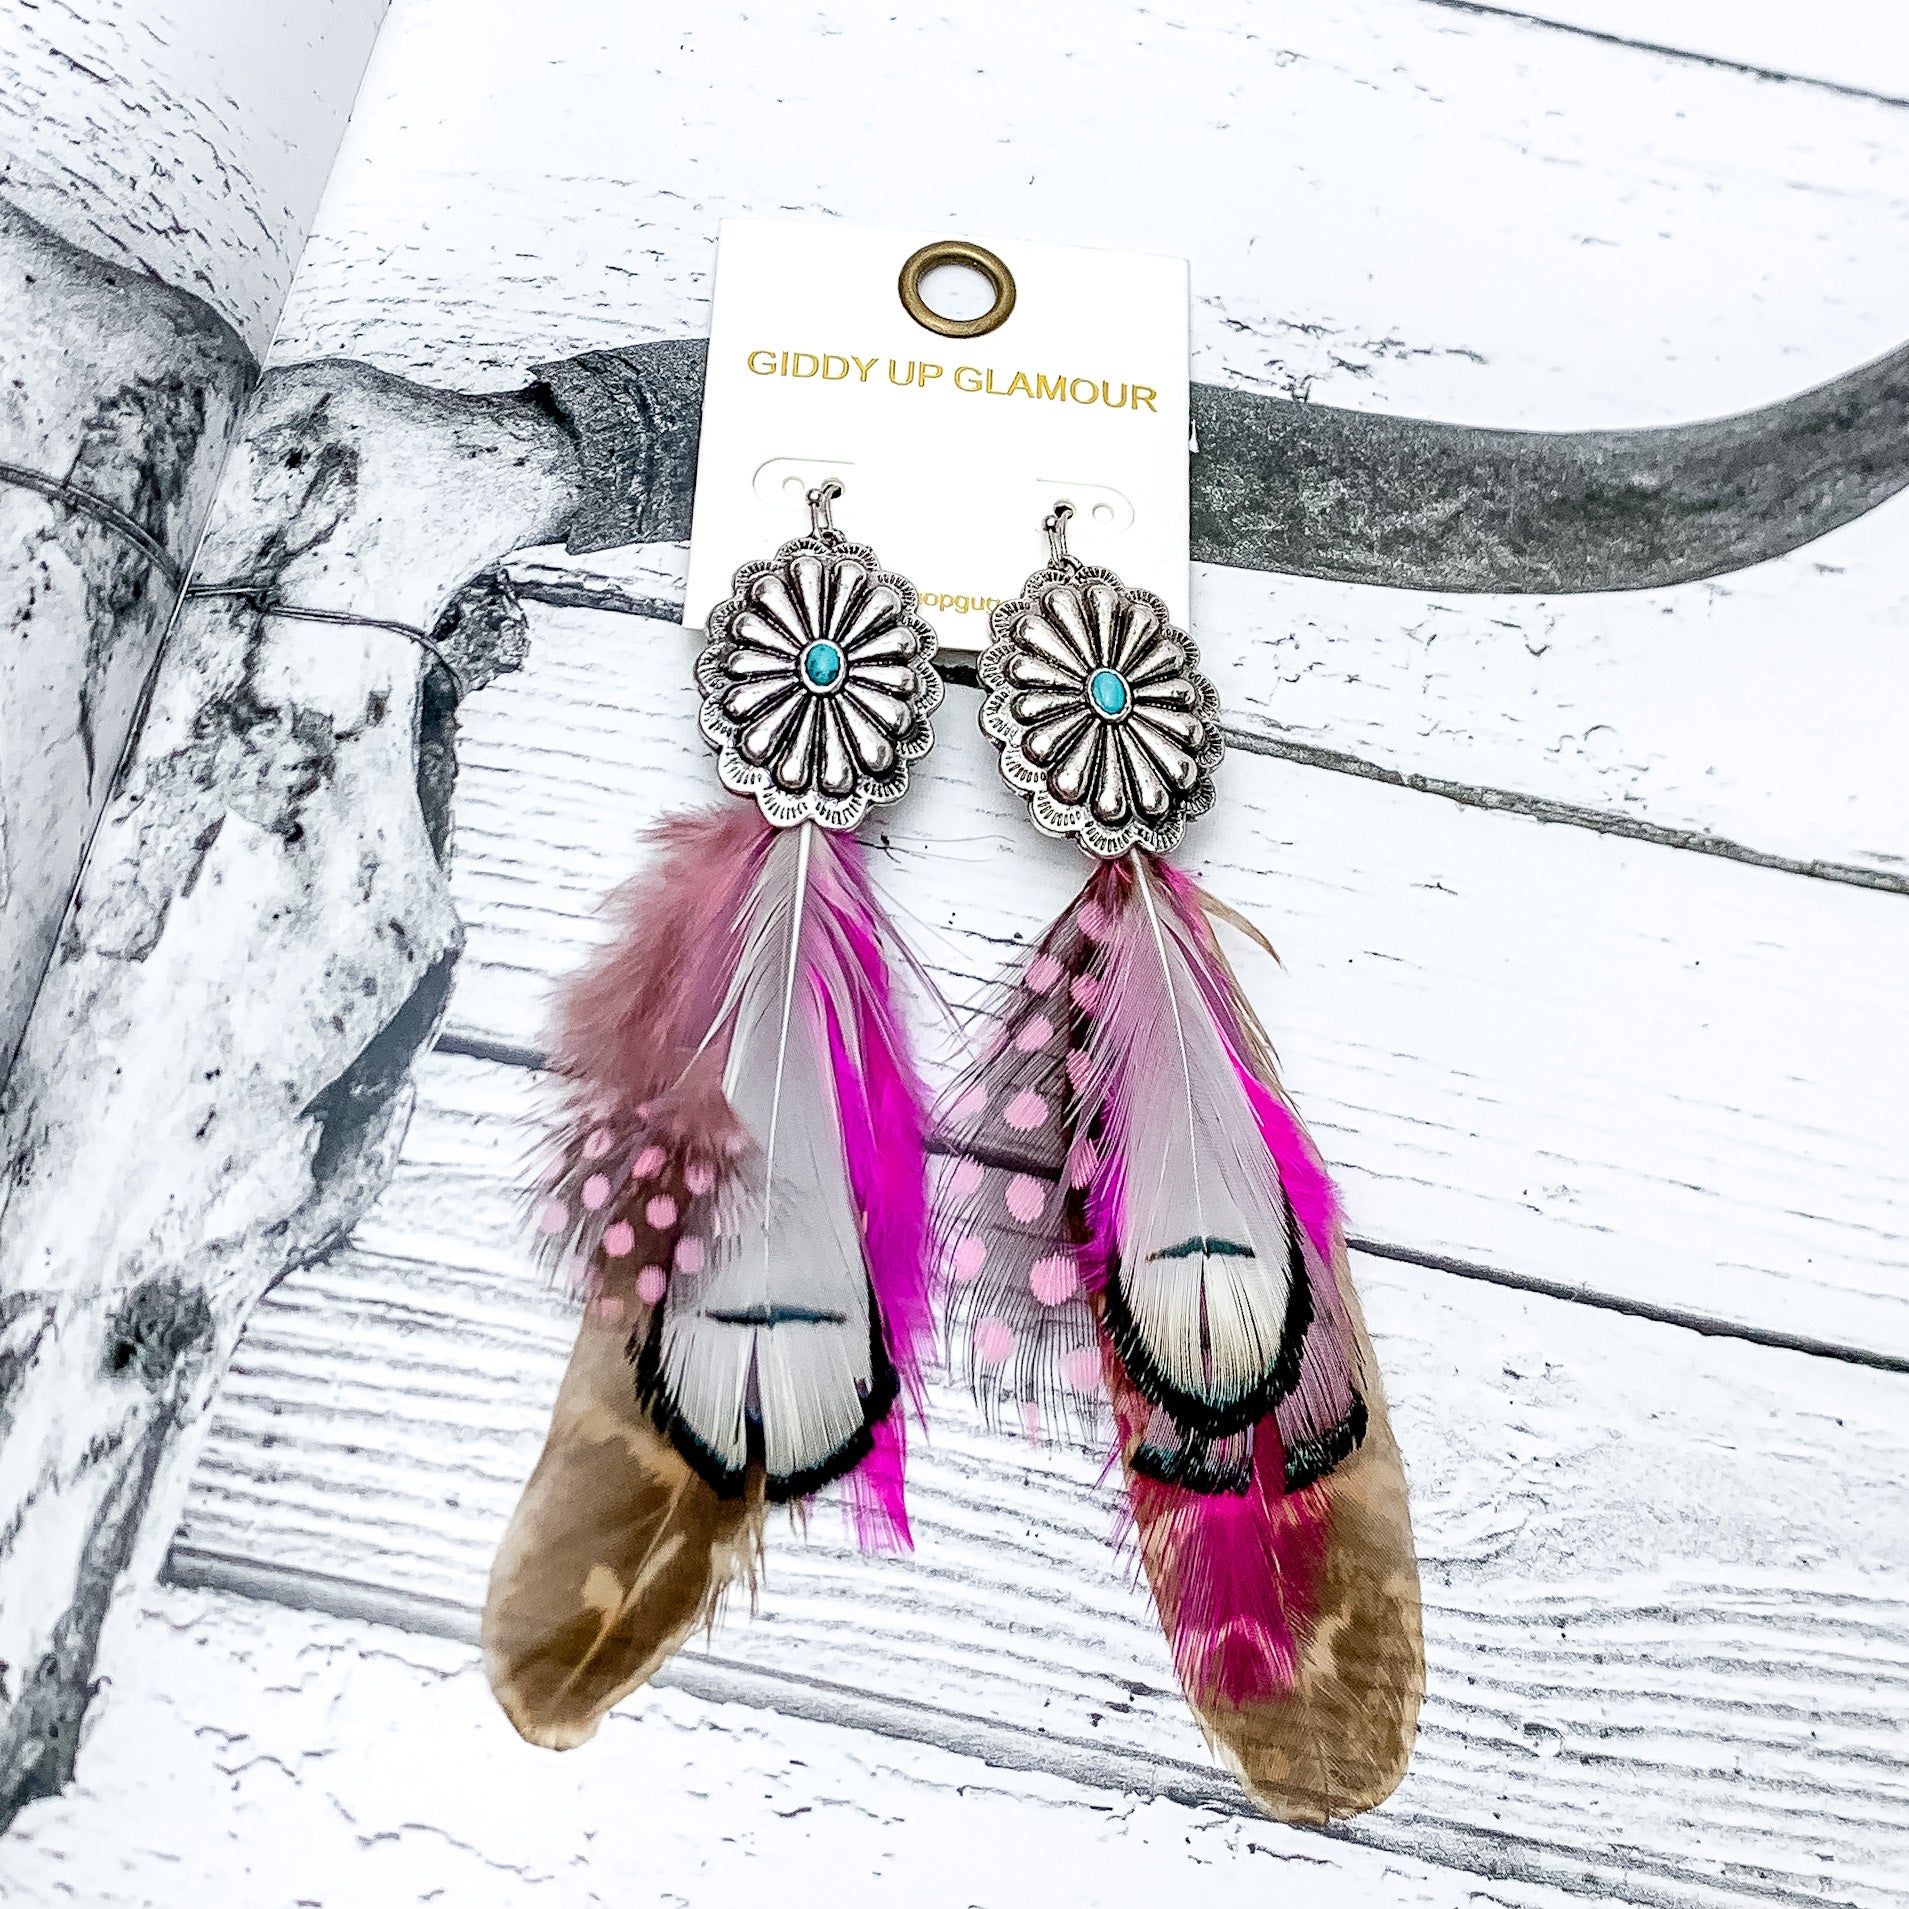 Desert Doll Silver Tone Feather Earrings in Hot Pink. Pictured on an open western book.